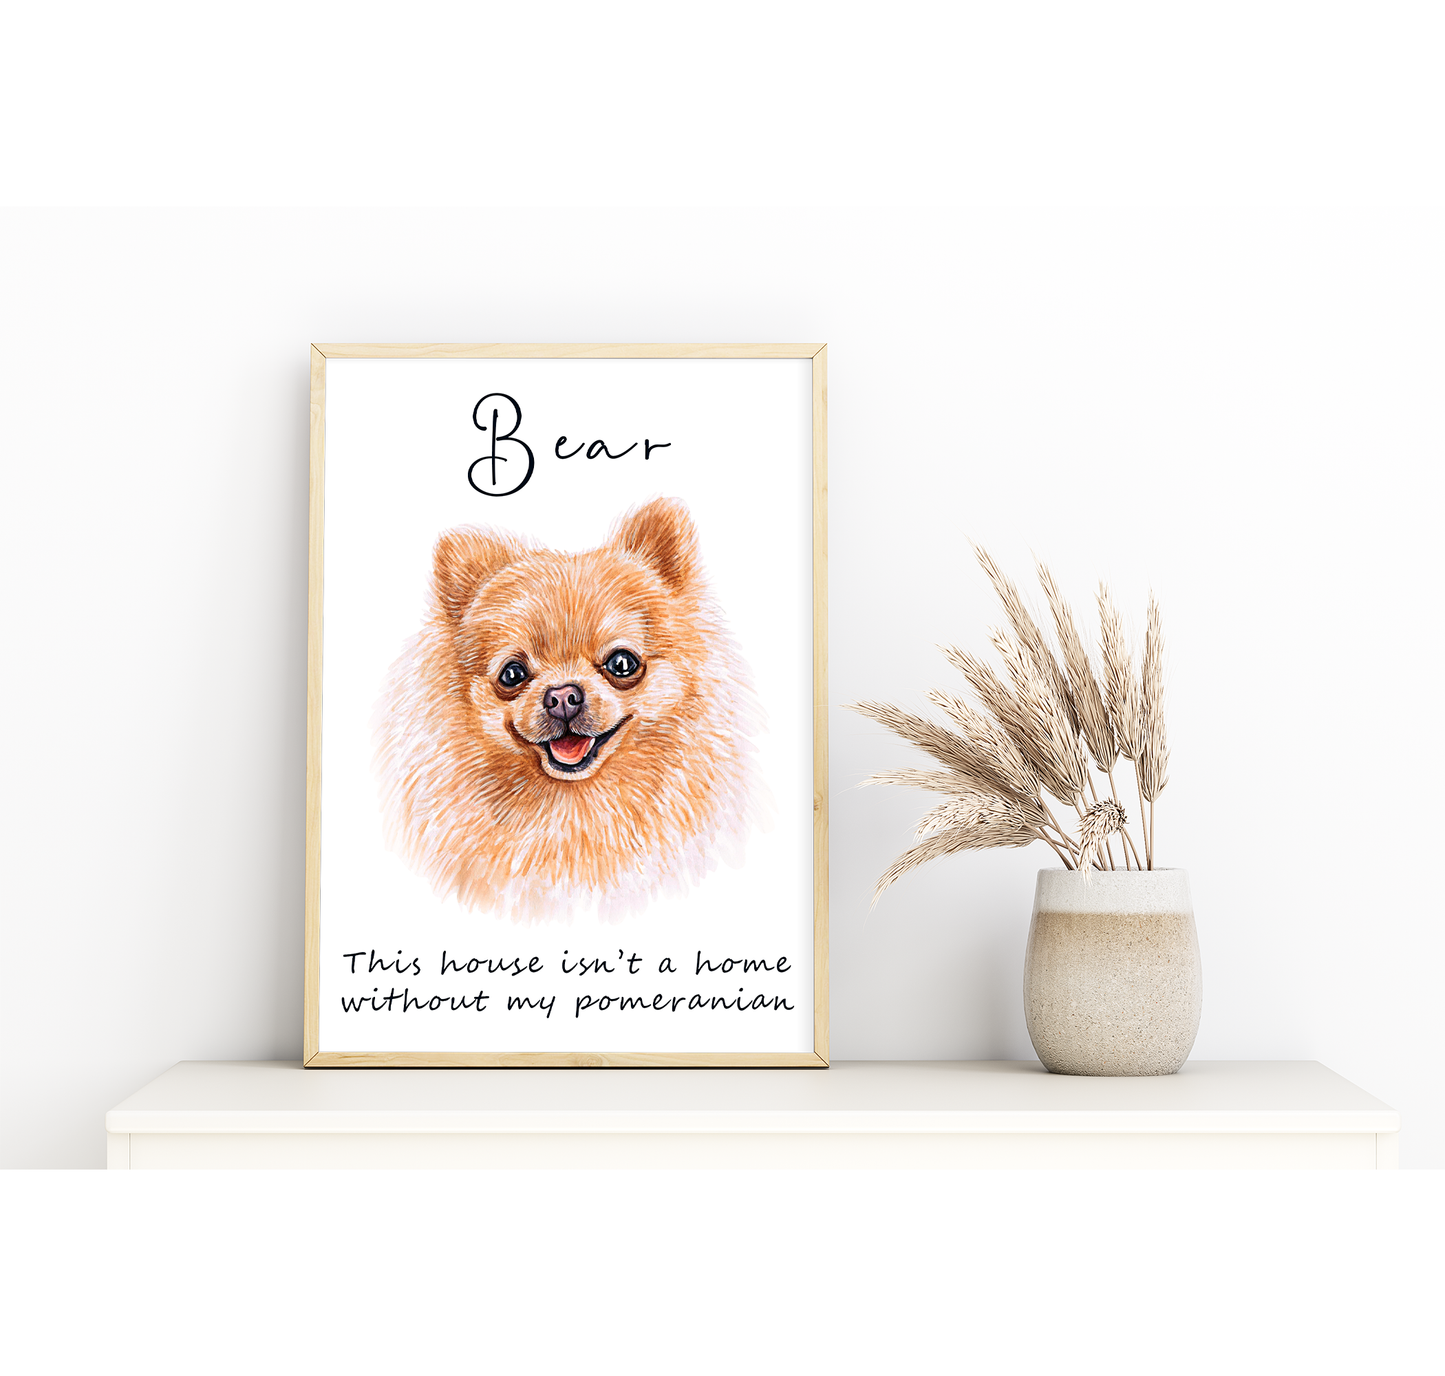 Spitz style dog artwork - portraits of keeshond, Elkhound, Akitas, Samoyed, huskies all with custom funny message | A4 | A5 | Greeting card